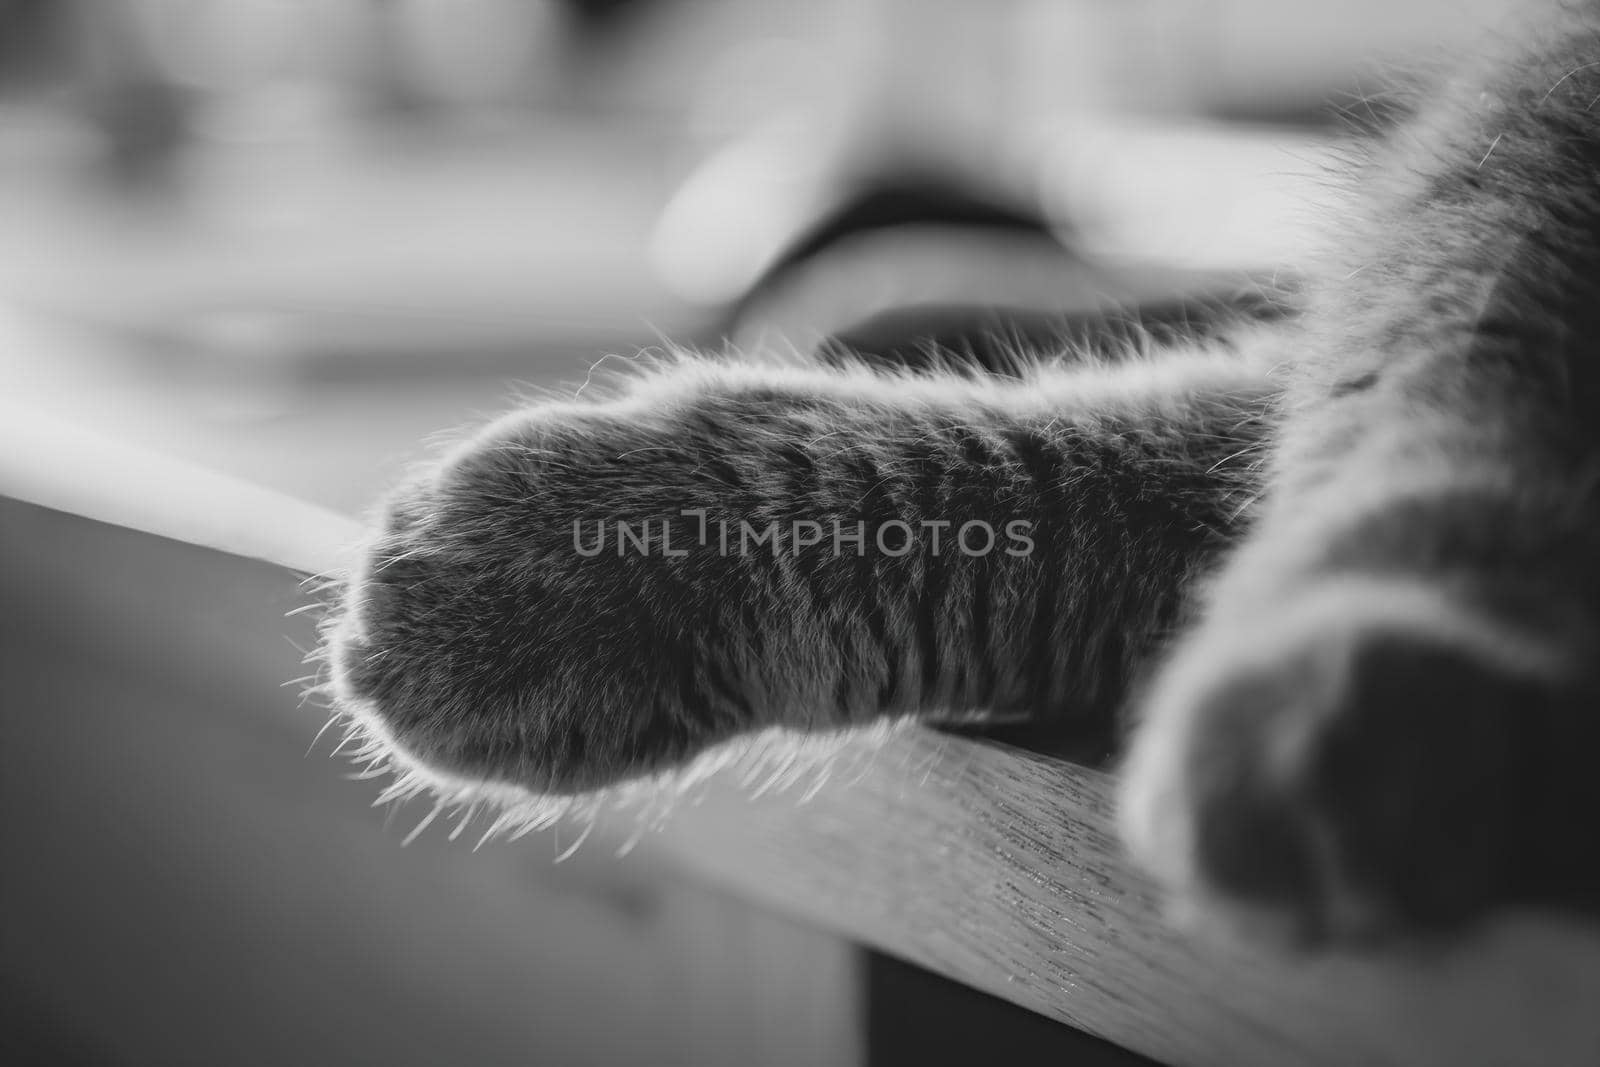 Close-up of british cat's paw, sleeping on a table at home. Blured background. Black and white